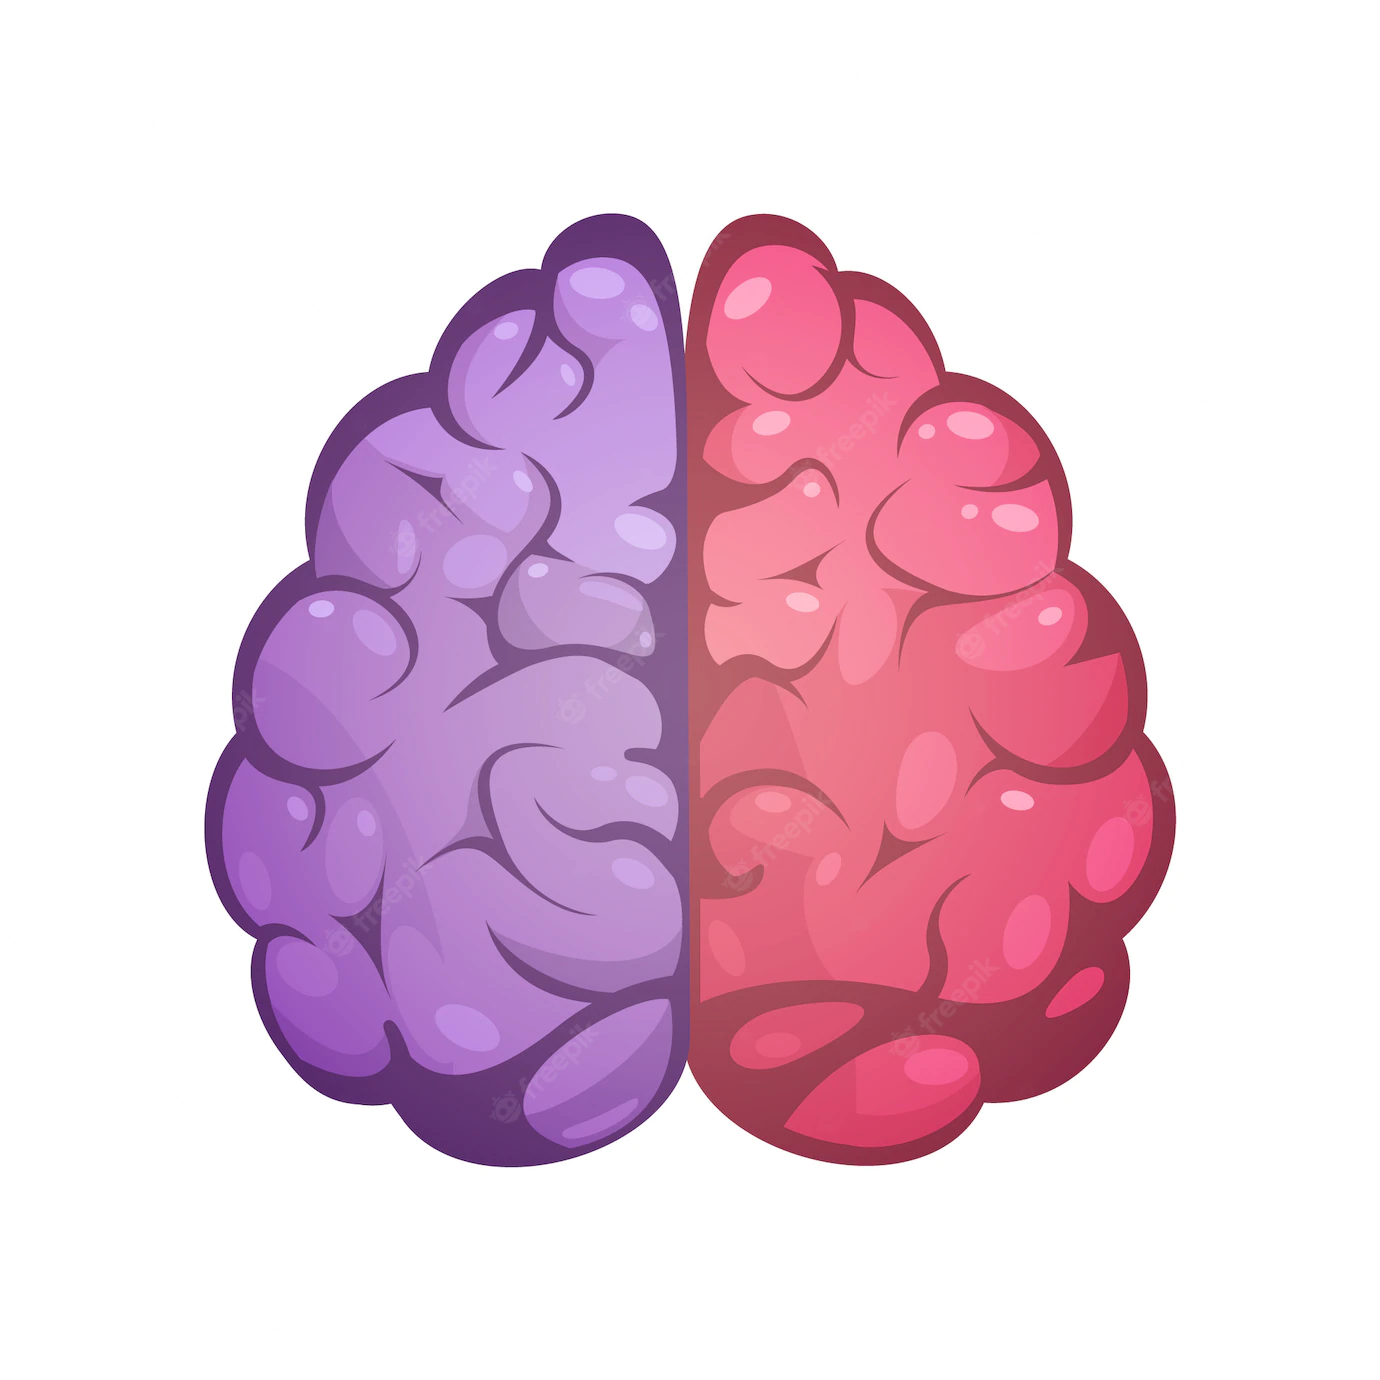 Human Brain Two Different Colored Symbolic Left Right Cerebral Hemispheres Model Image Icon Abst 1284 16779